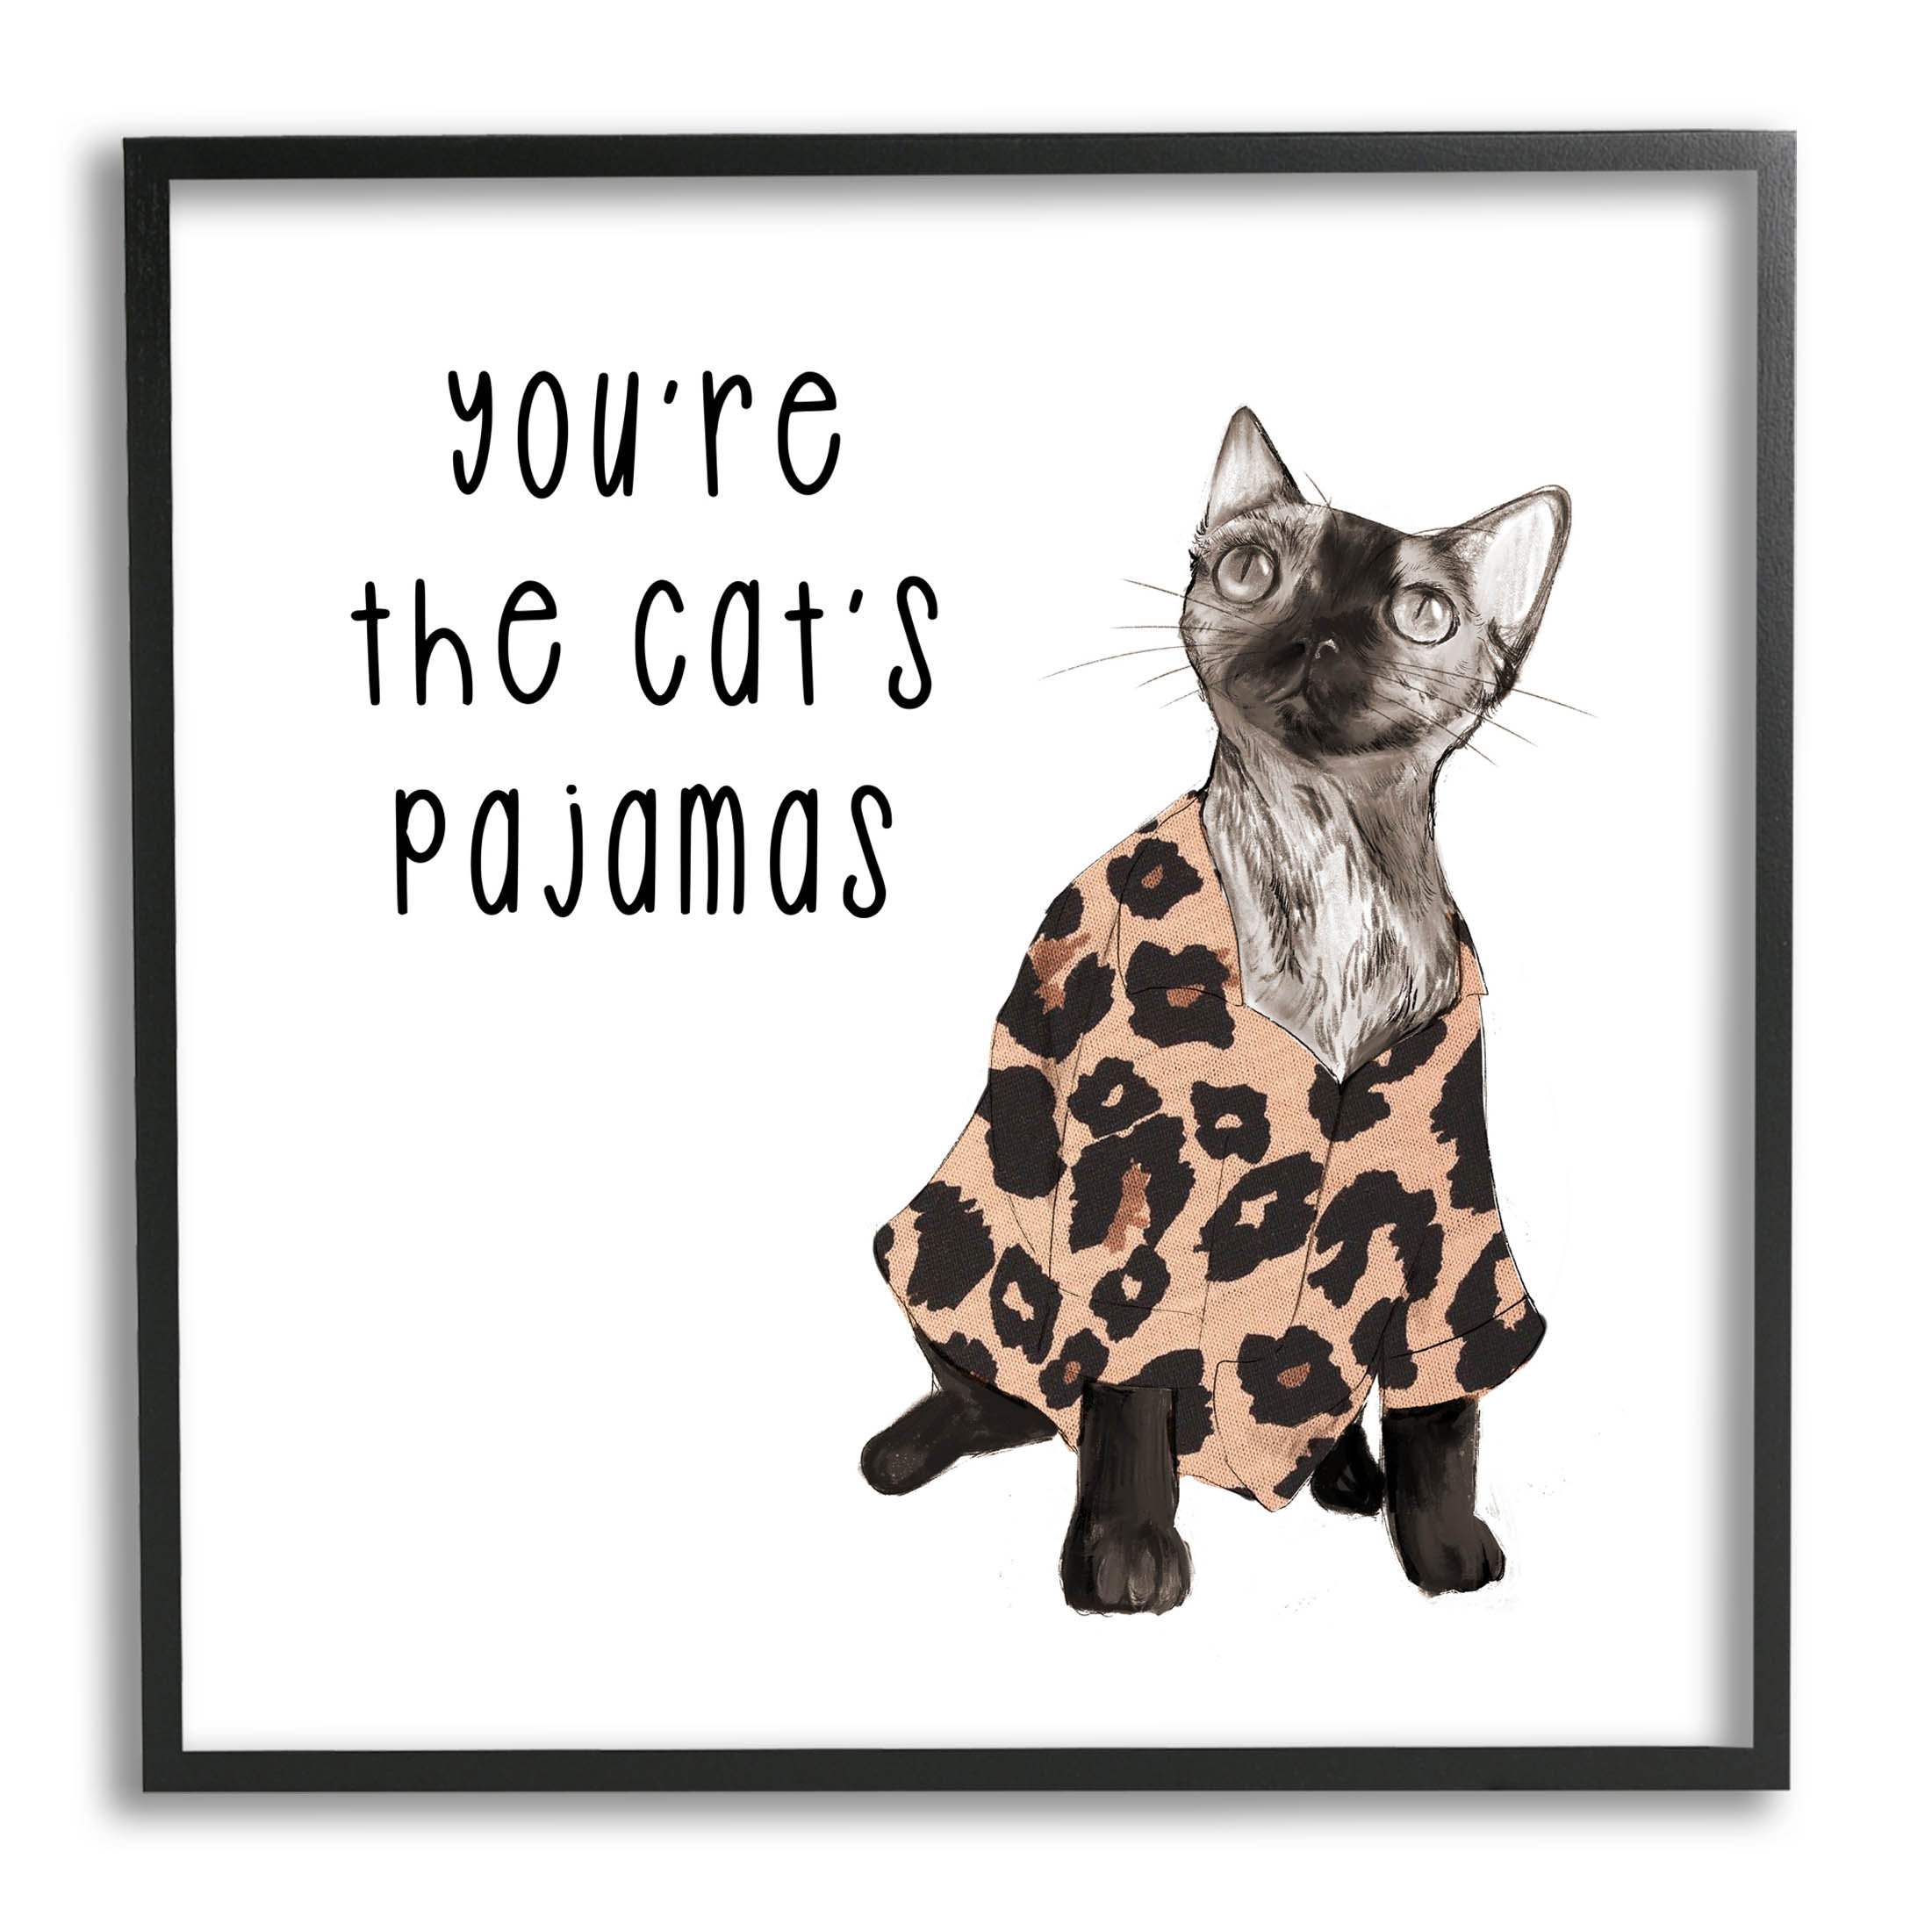 Stupell Industries The Cat's Pajamas Humor Framed On Canvas by Lil' Rue  Textual Art